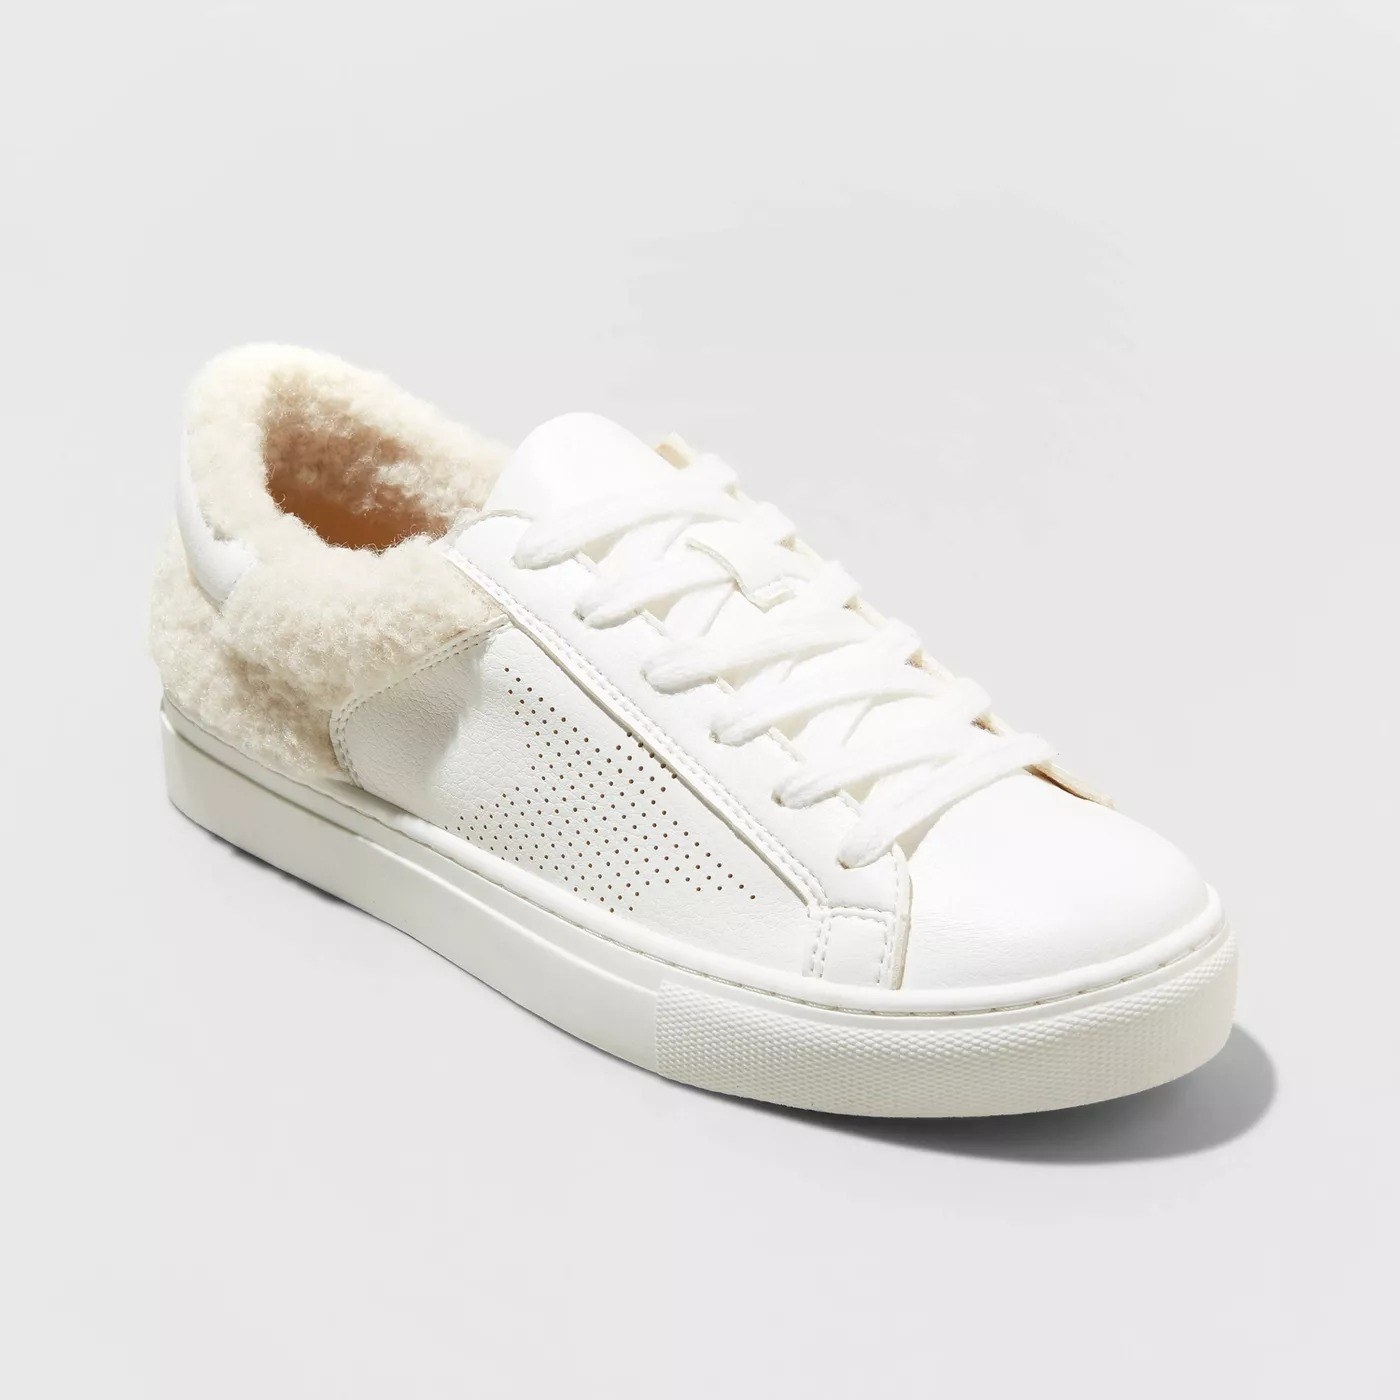 The white sneaker with white laces, and star detail